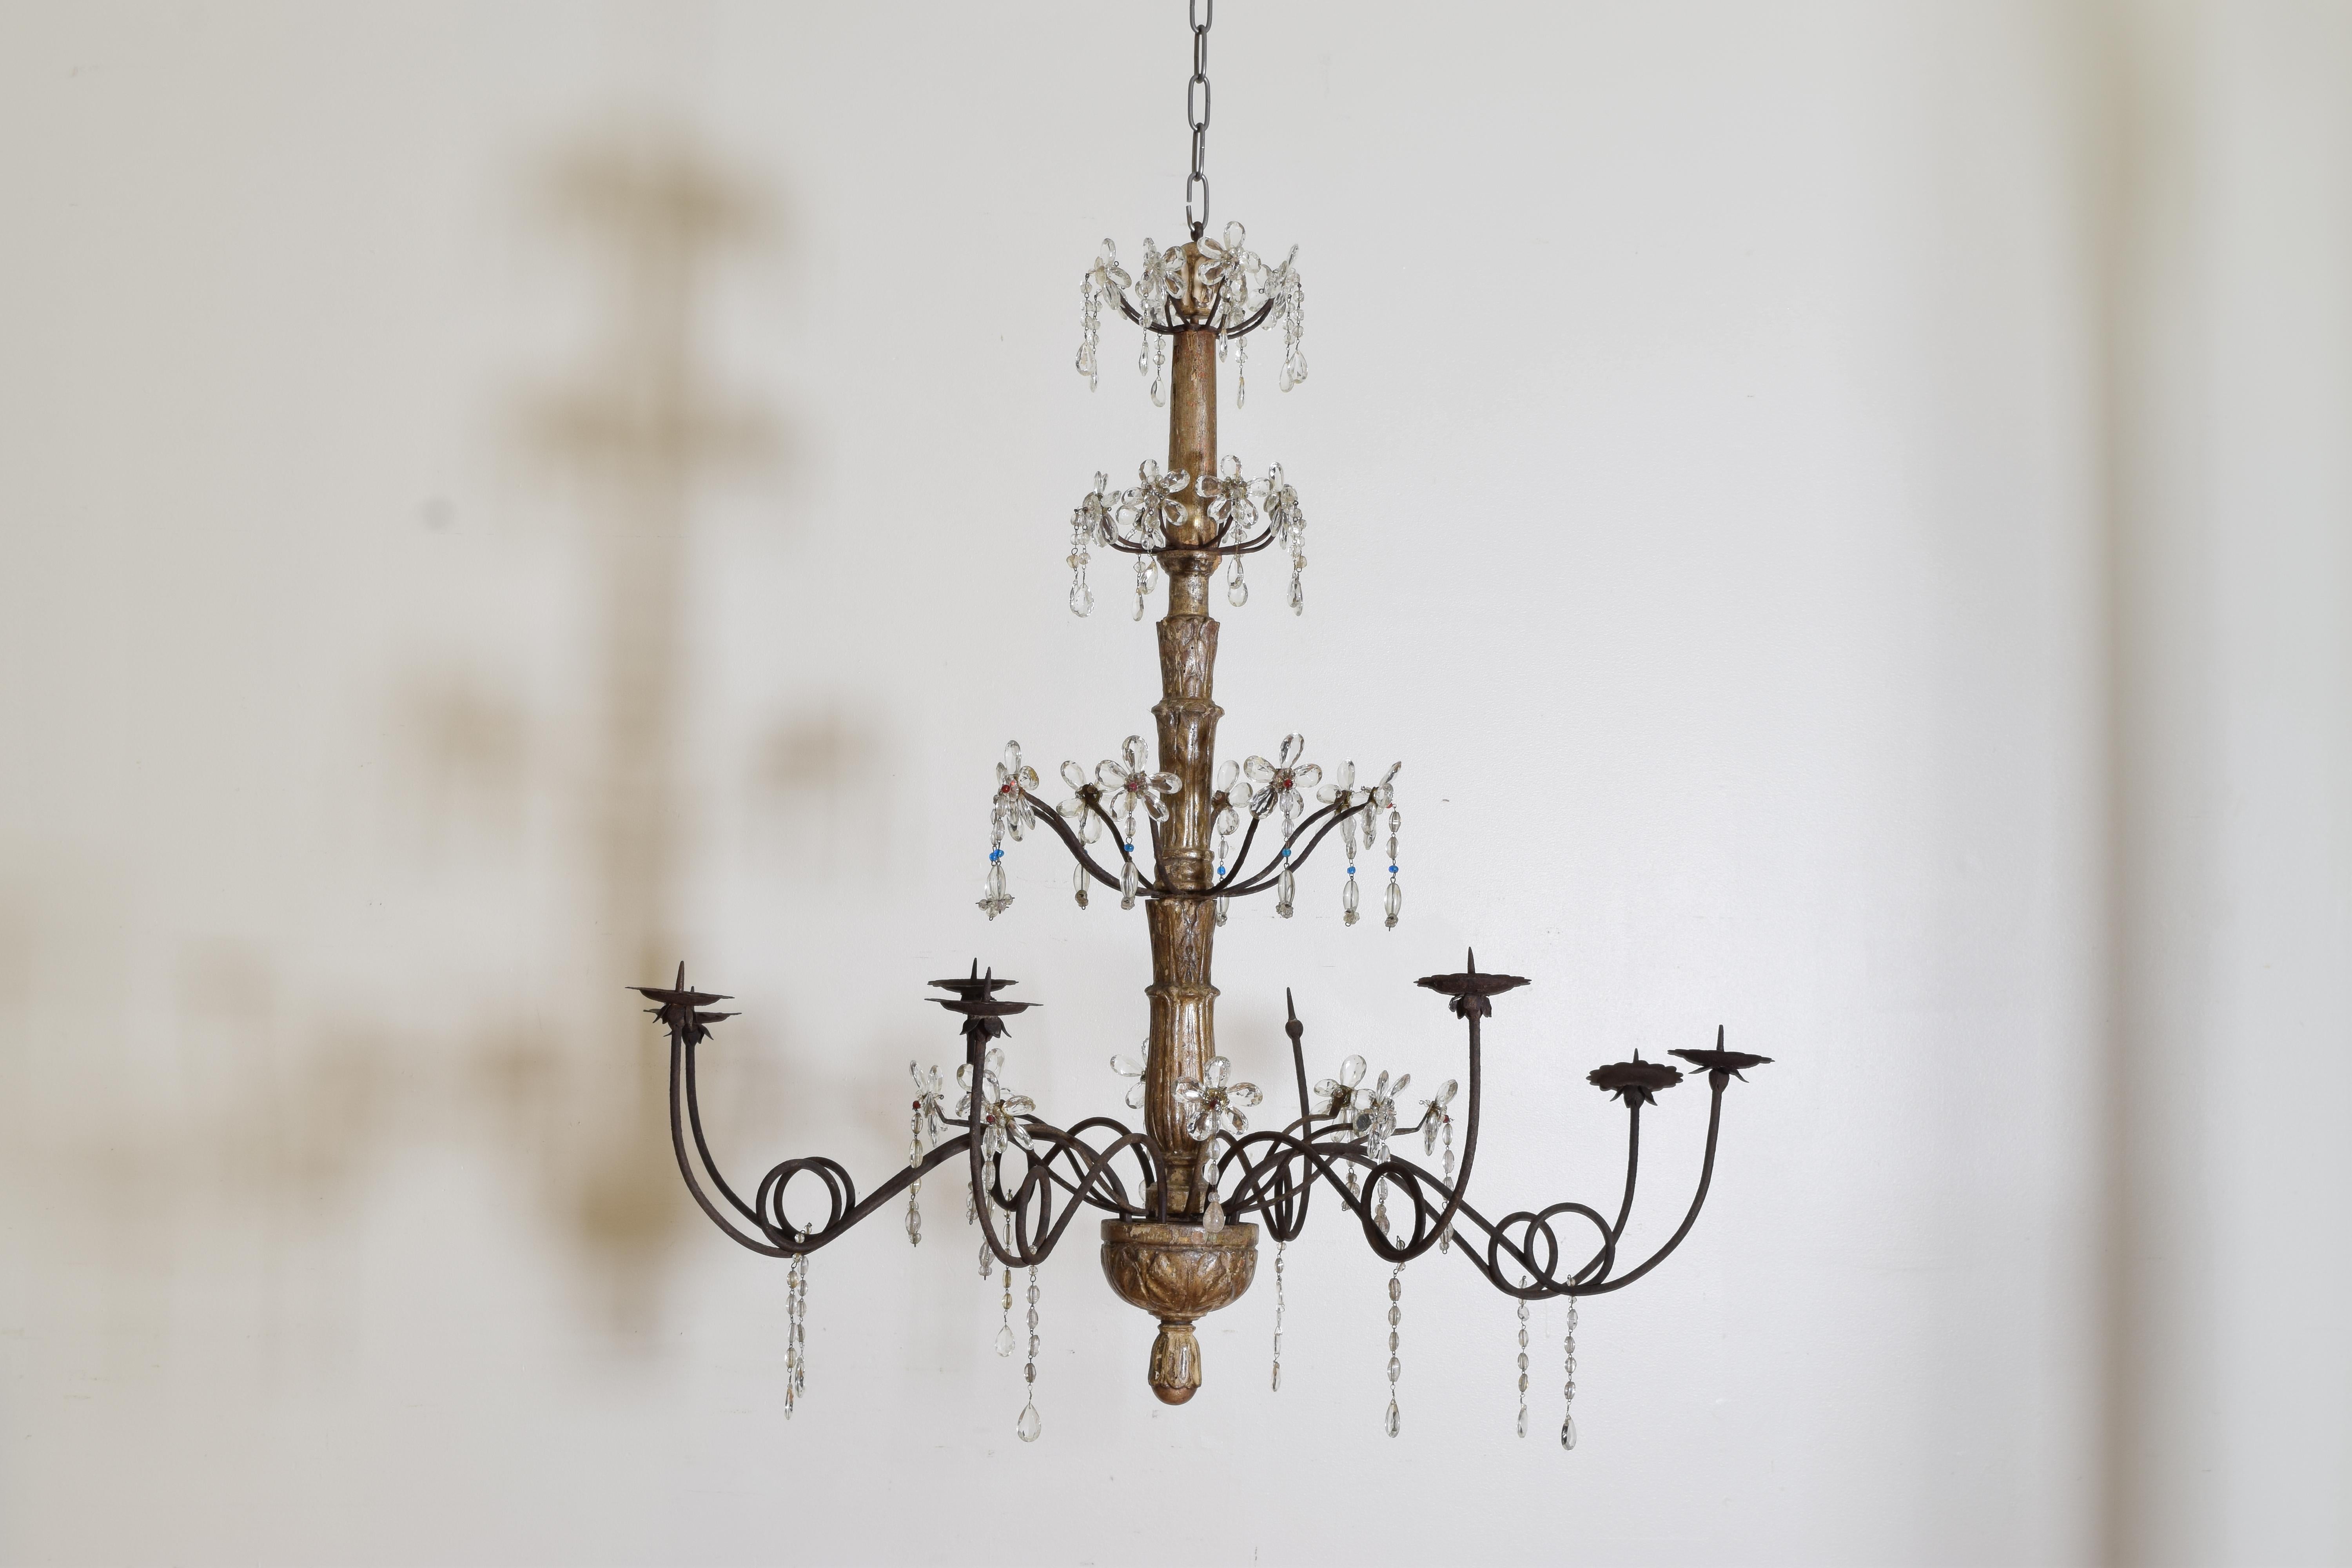 Constructed of a tapering carved standard, the sections divided by iron arms issuing from the circular dividers, the arms decorated with glass flowers made up of teardrop shaped prisms with some colored glass accents